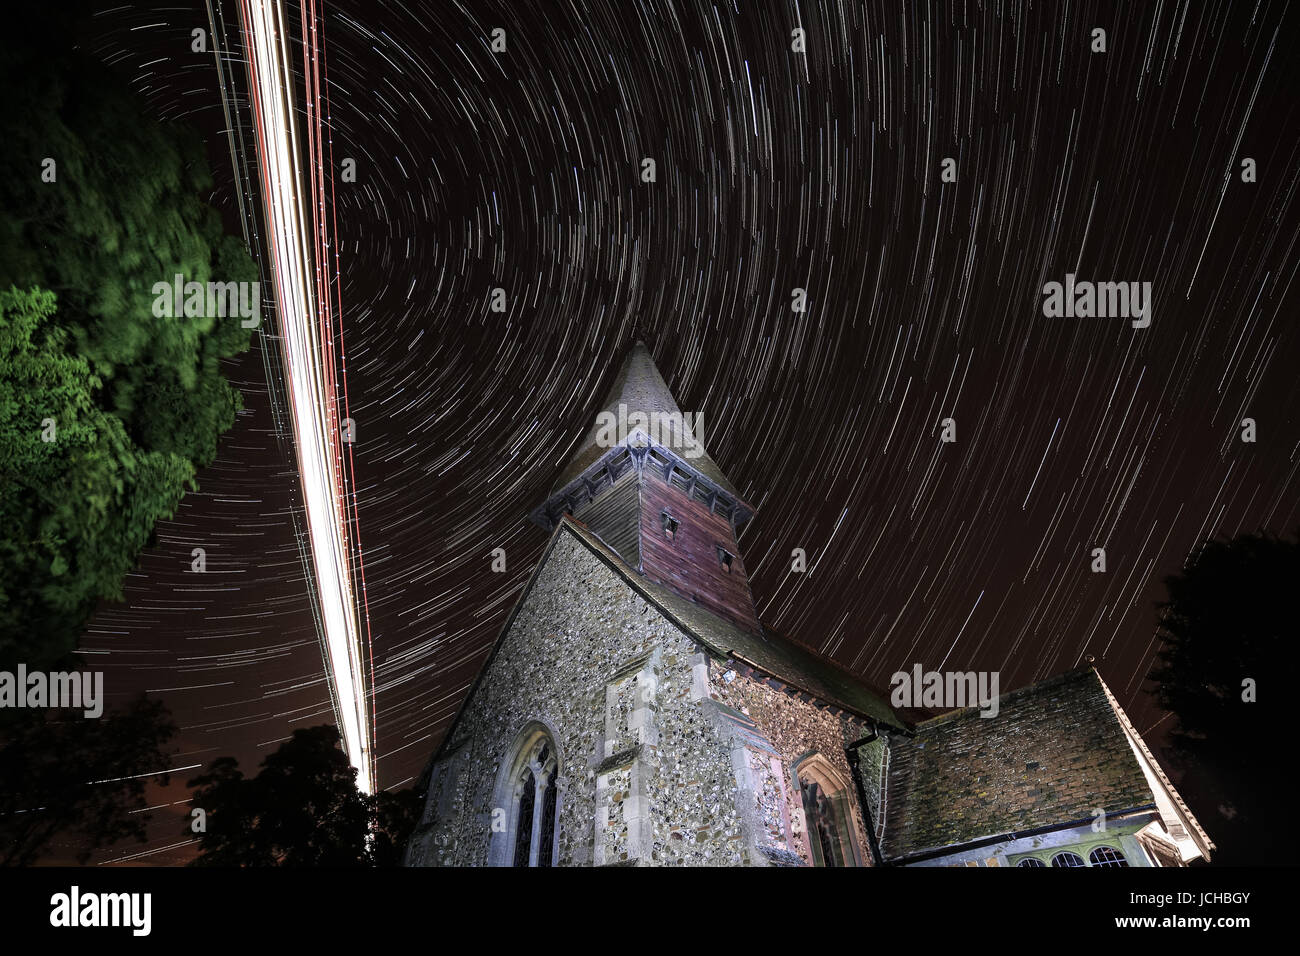 broxted church, essex, england, uk flight path planes to stansted airport long exposure photography Stock Photo